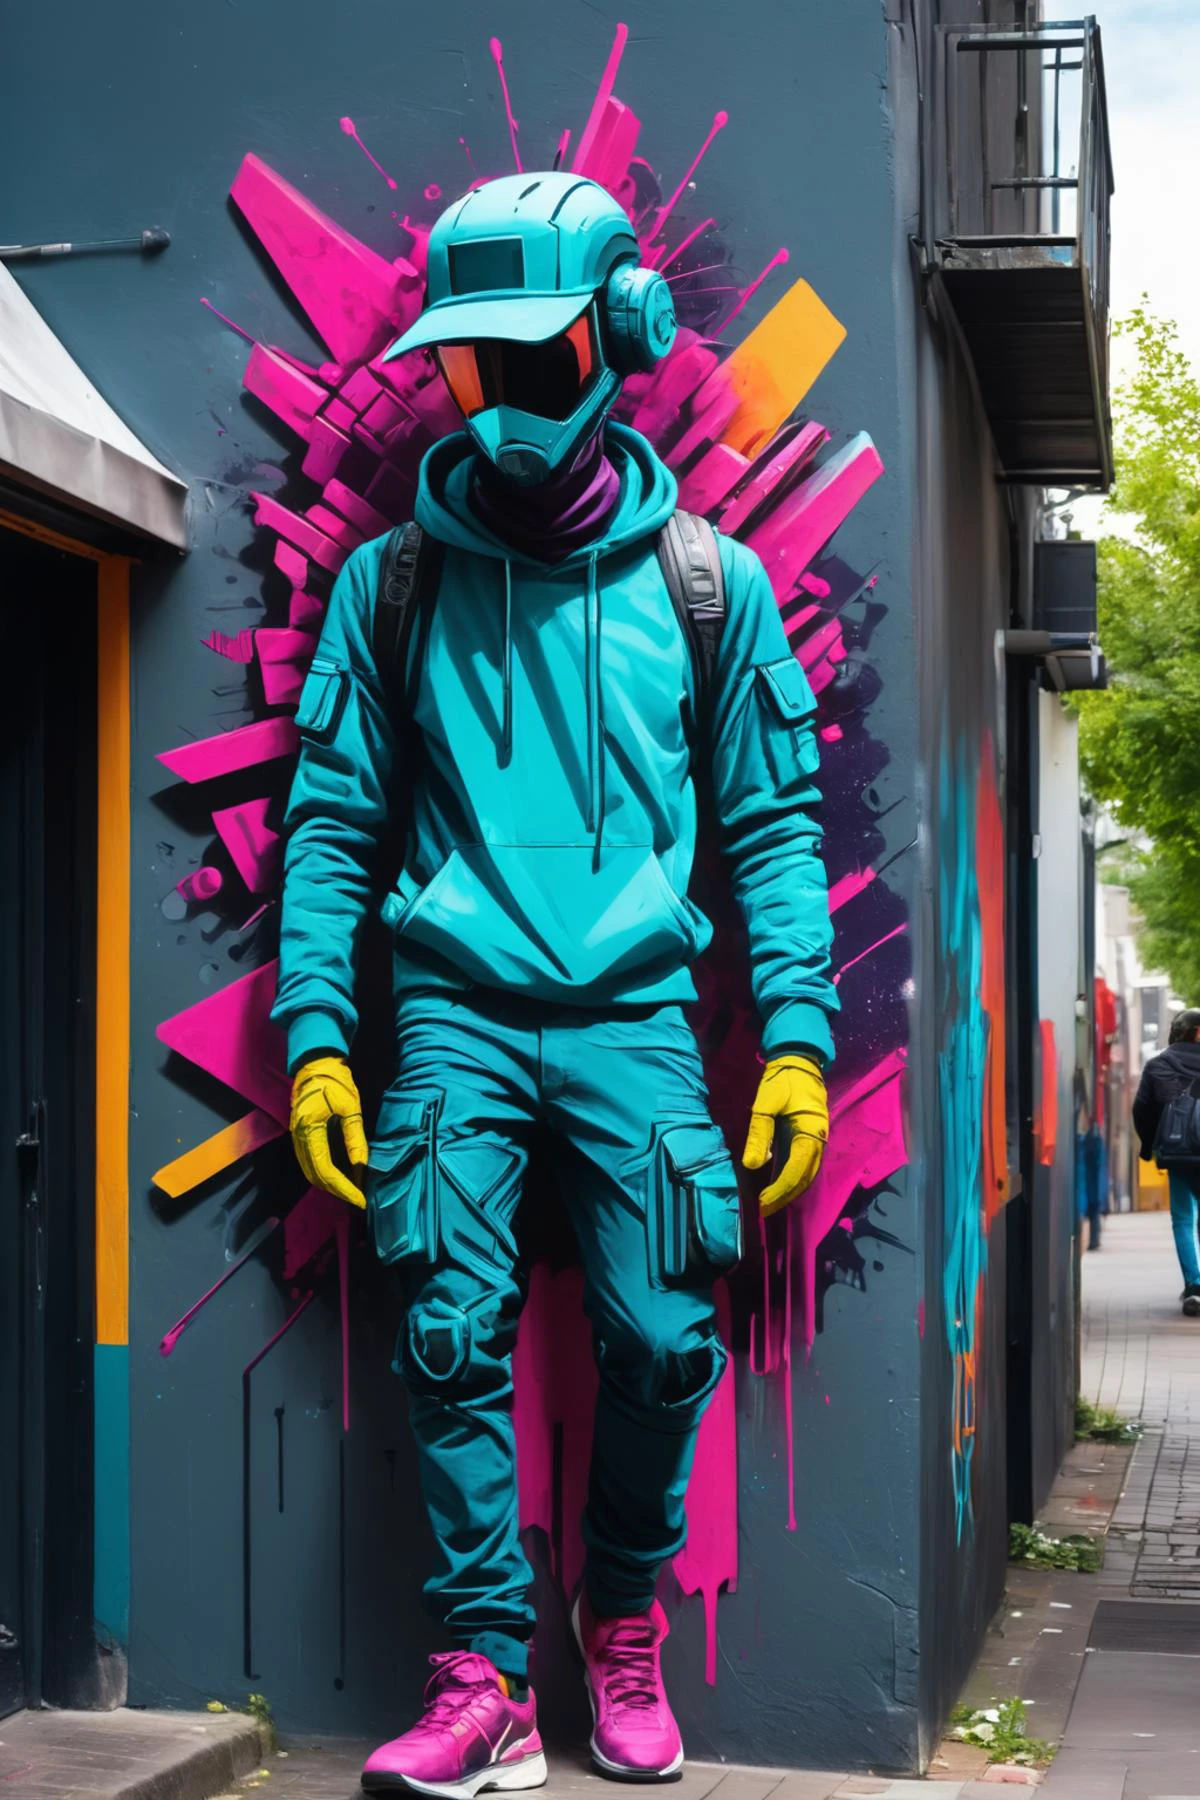 RAW photo of a Tech-artisan crafting intricate cyber-sculptures (Walking confidently, purposeful stride) at a Augmented reality street art on urban walls, cyberpunk style, Gorgeous splash of vibrant paint